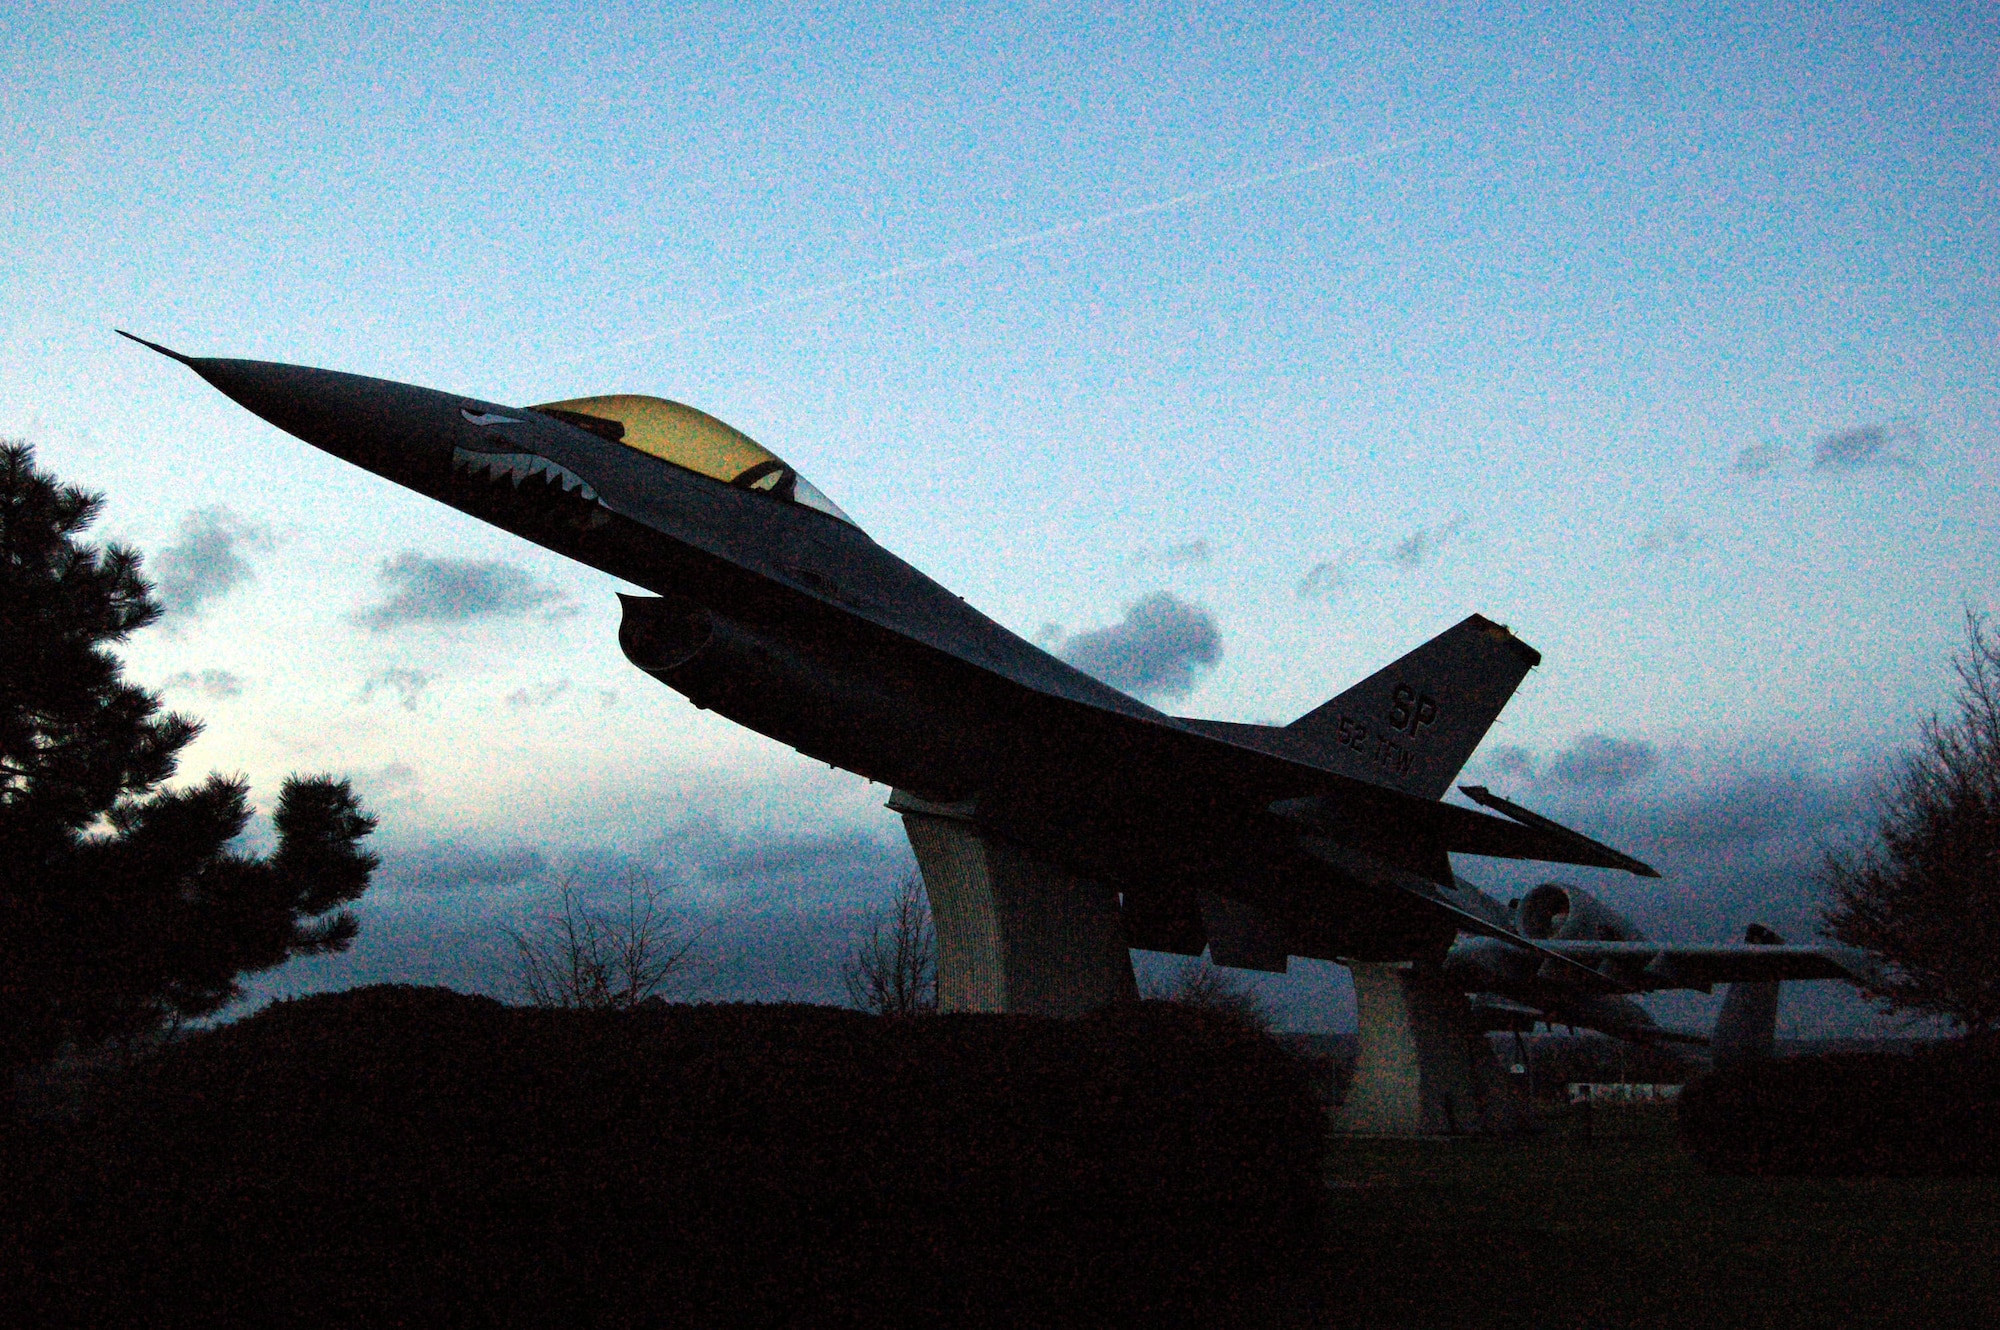 The workhorse of the Persian Gulf War, the F-16 flew 13,500 sorties -- more than any other aircraft. Designed as a multi-role aircraft, the F-16 was used extensively in subsequent contingency operations. This jet (tail number 78-0057) which rests peacefully against the setting sun, was gained by the U.S. Air Force in February 1980. It was retired from the operational inventory in 1990. (US Air Force photo by Senior Airman Eydie Sakura)